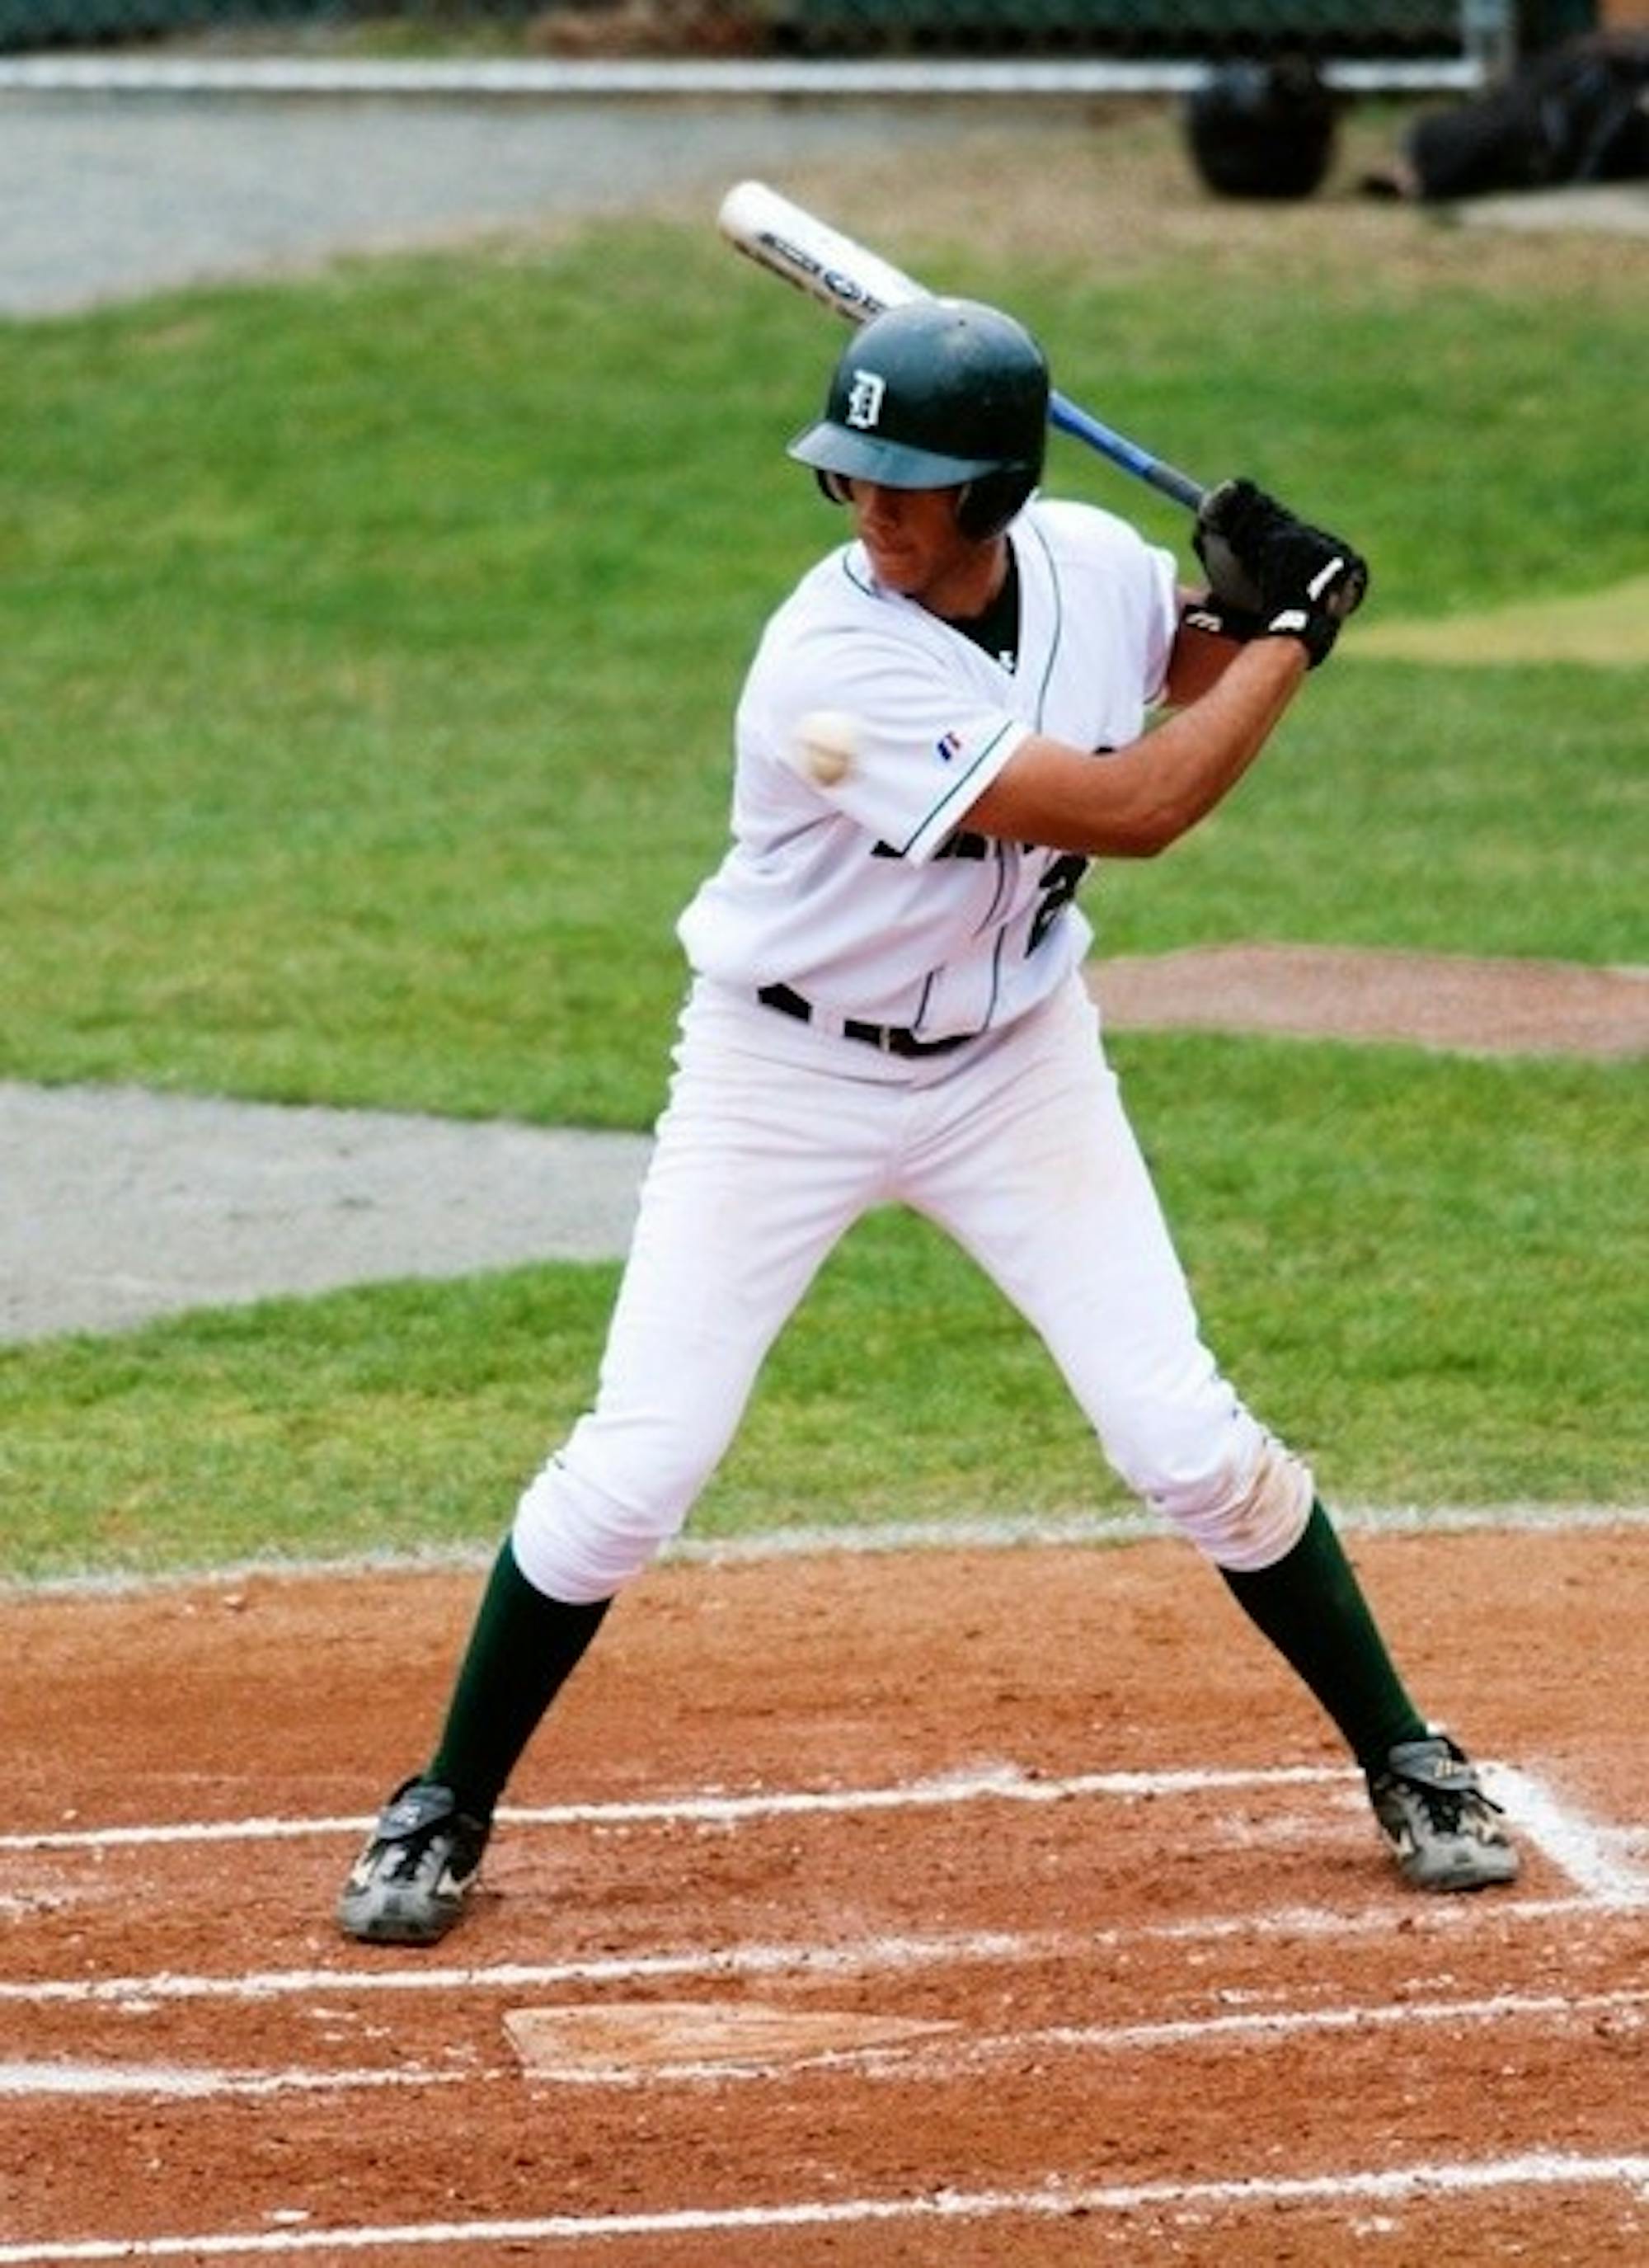 Since joining the Savannah Sand Gnats, Nick Santomauro '10 has played in nine games. He is currently batting .135 and has amassed five hits.